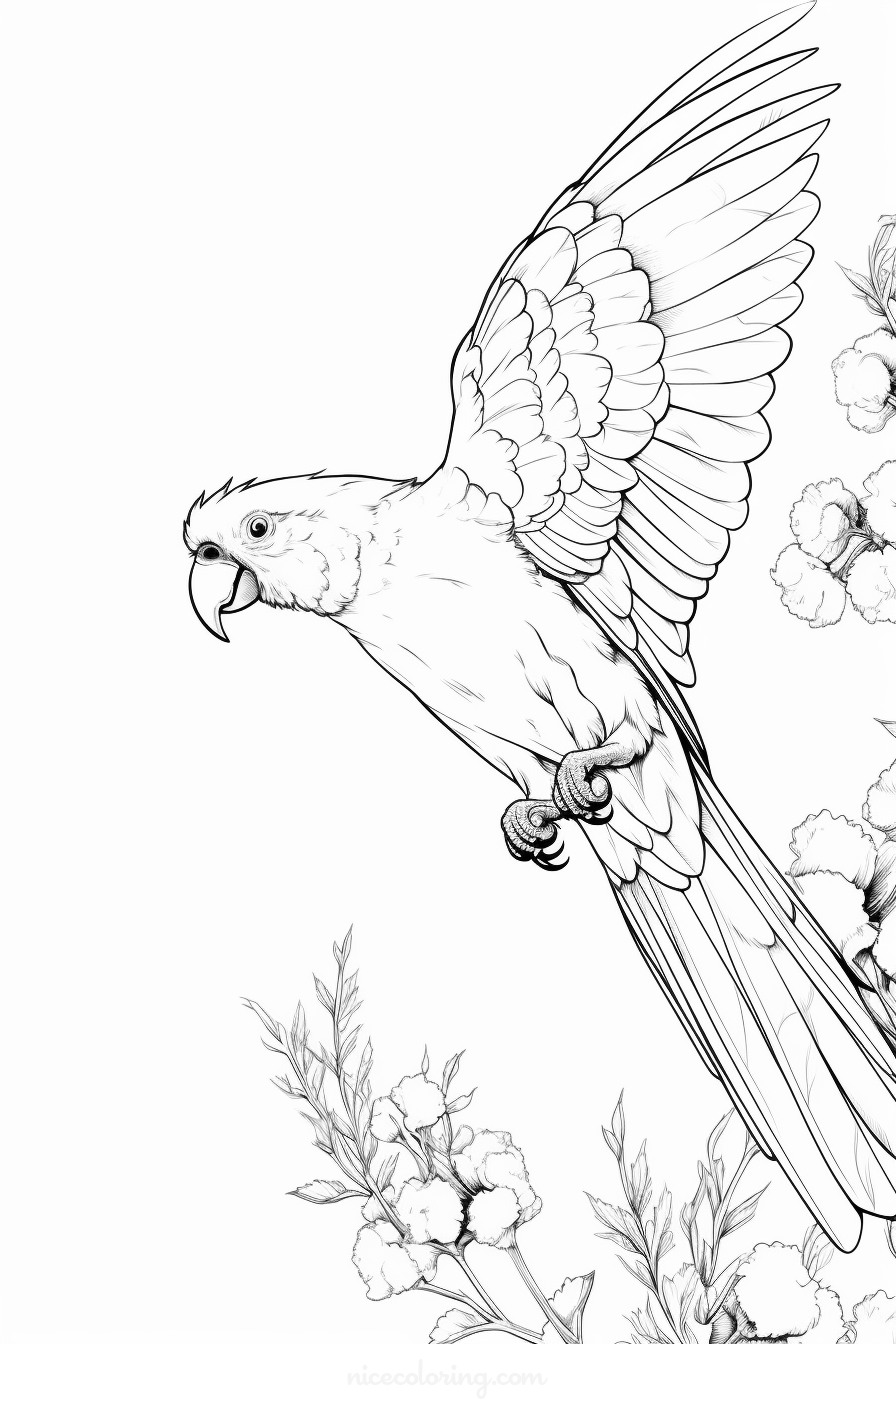 Birds in nature coloring page